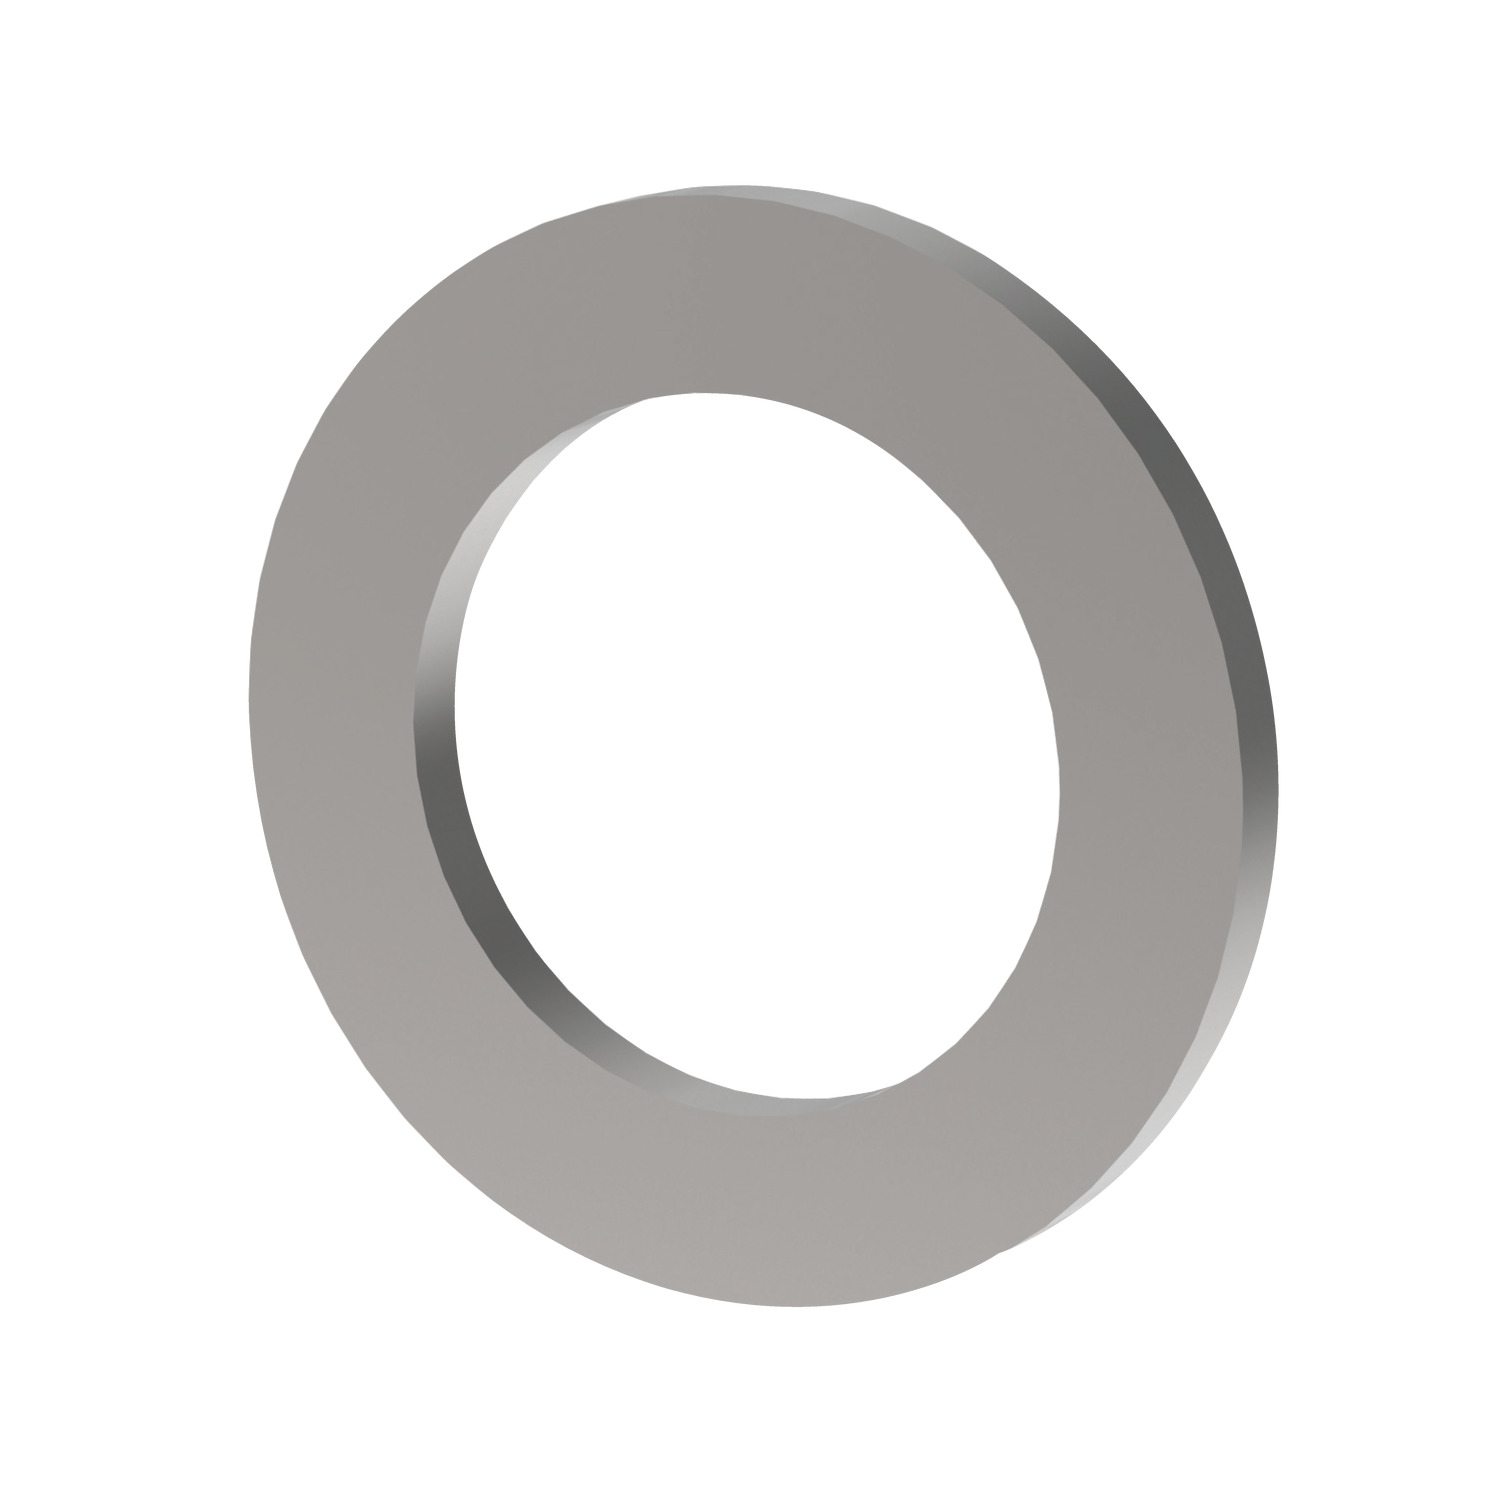 Flat Washers Our range of standard flat washers including larger diameter and heavy designs, available in zinc plated steel, stainless (A2 or A4) or brass. 